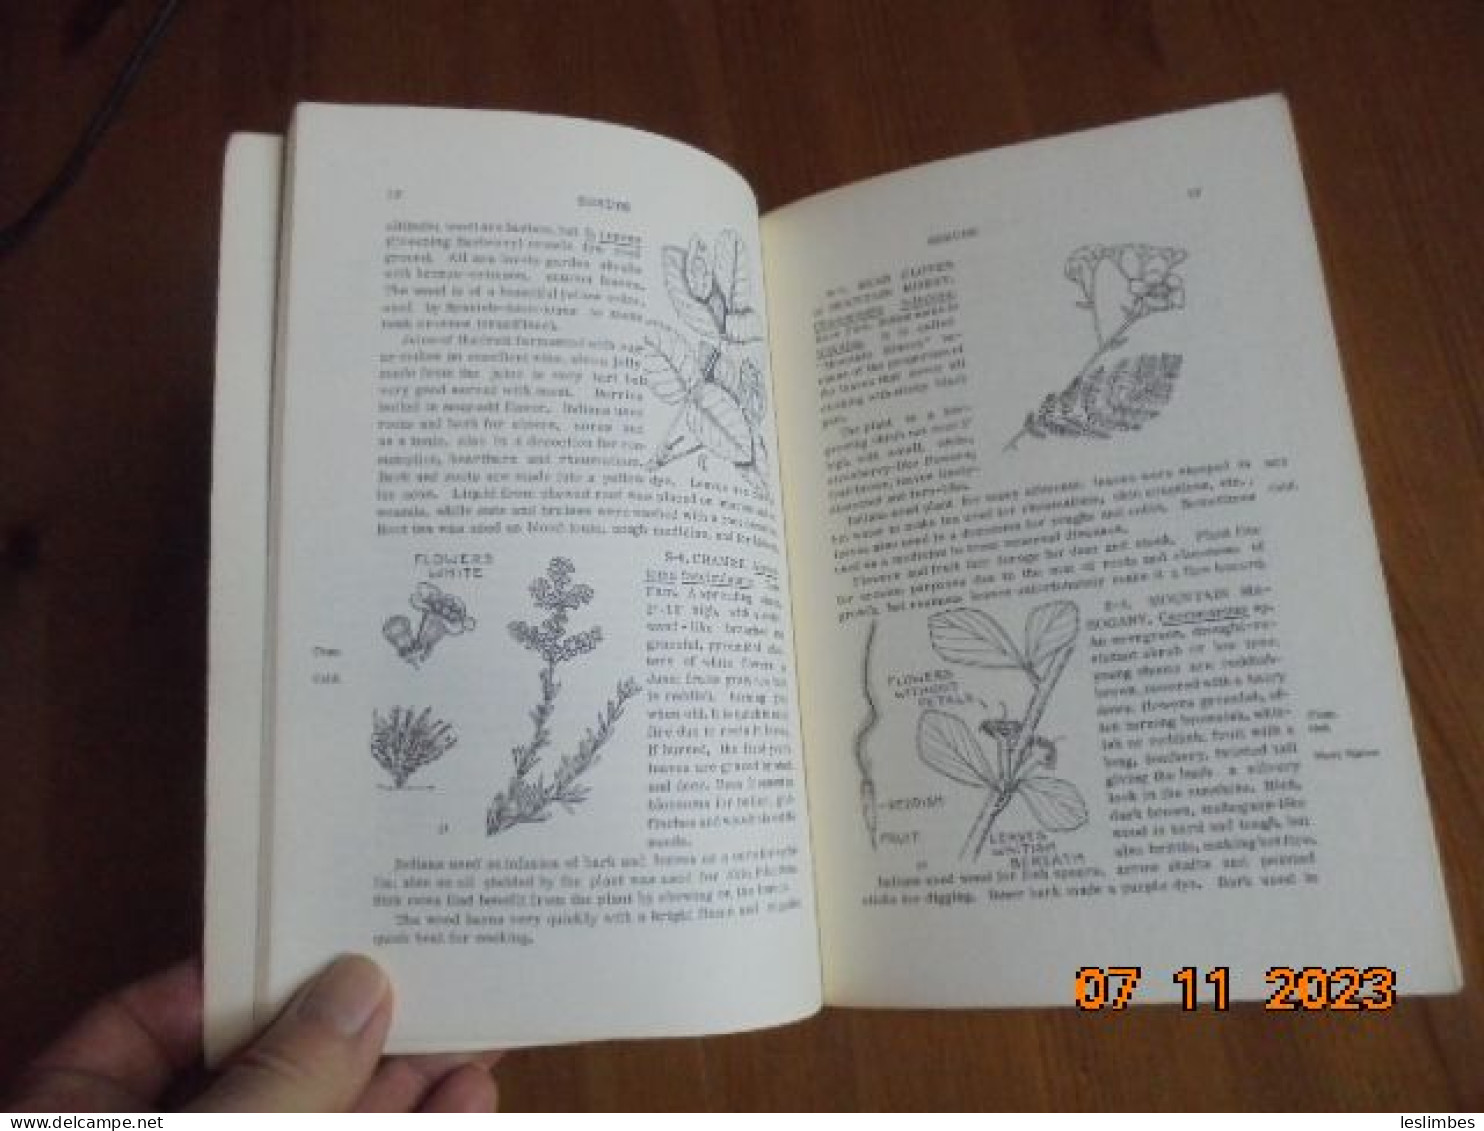 Common Edible And Useful Plants Of The West: With Illustrations Of 116 Plants - Muriel Sweet - Naturegraph 1962 - Vie Sauvage